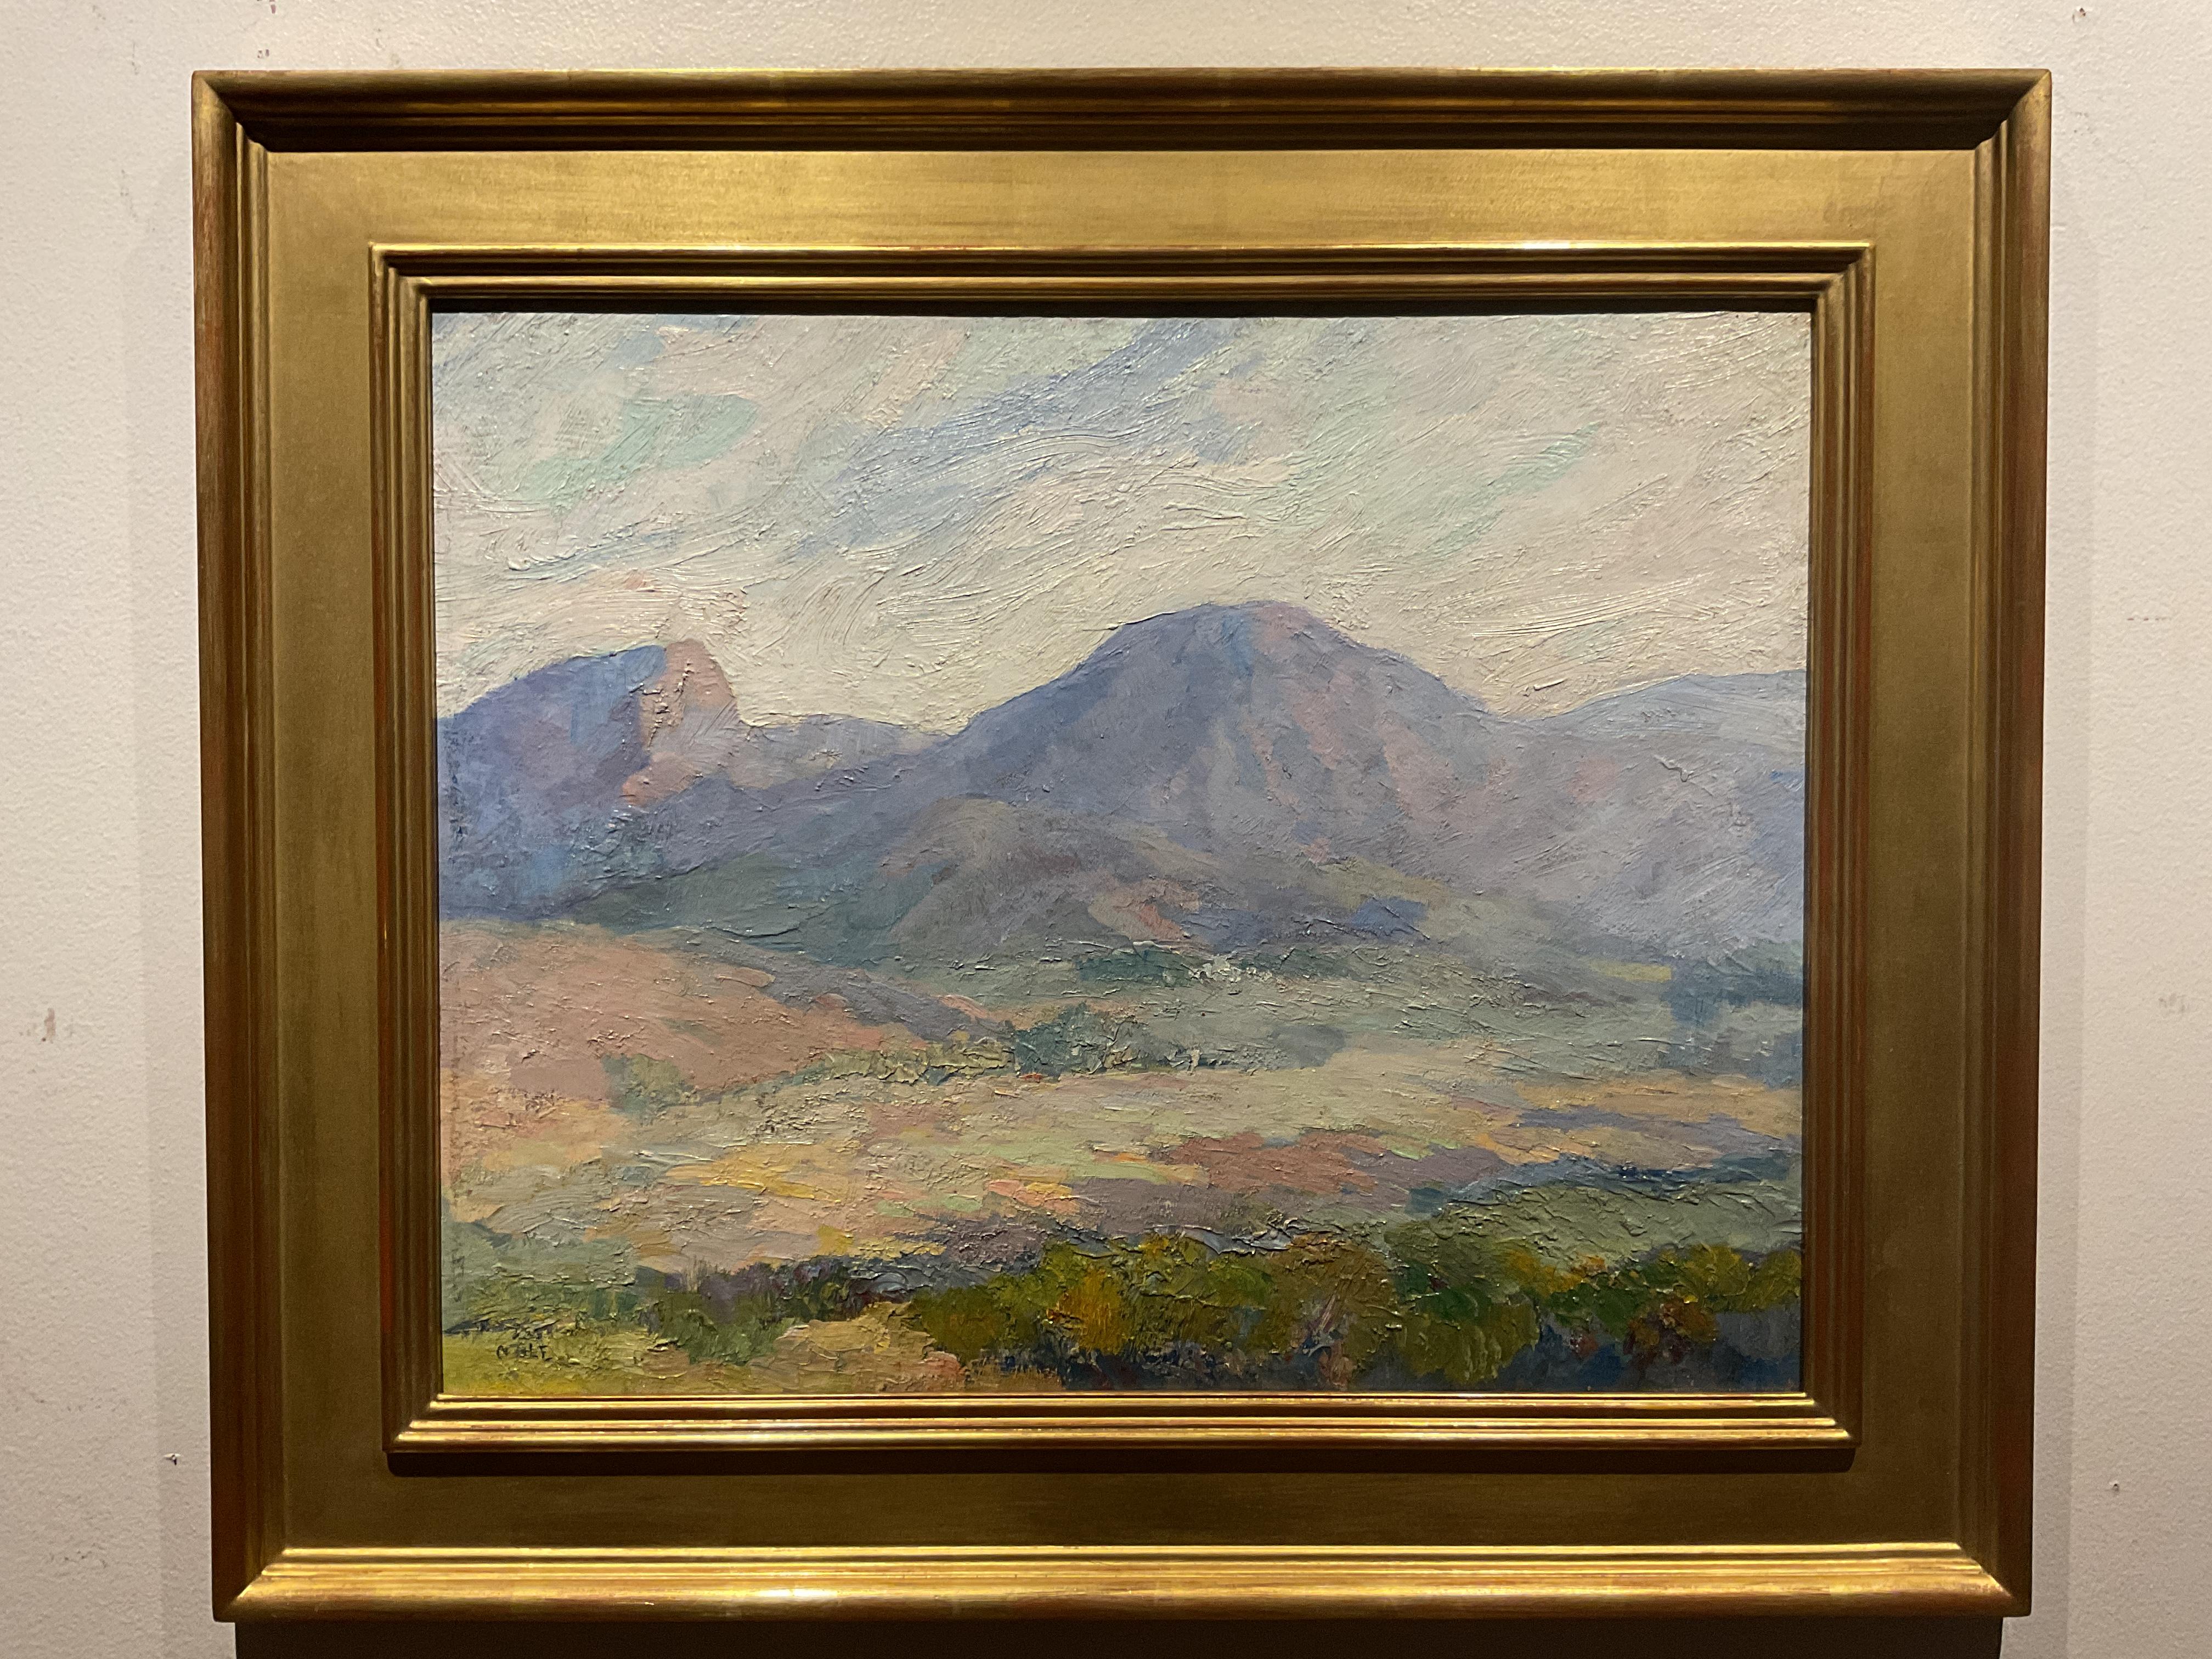 Lovely California Landscape Painting by listed artist John Thomas Nolf, ca 1920s